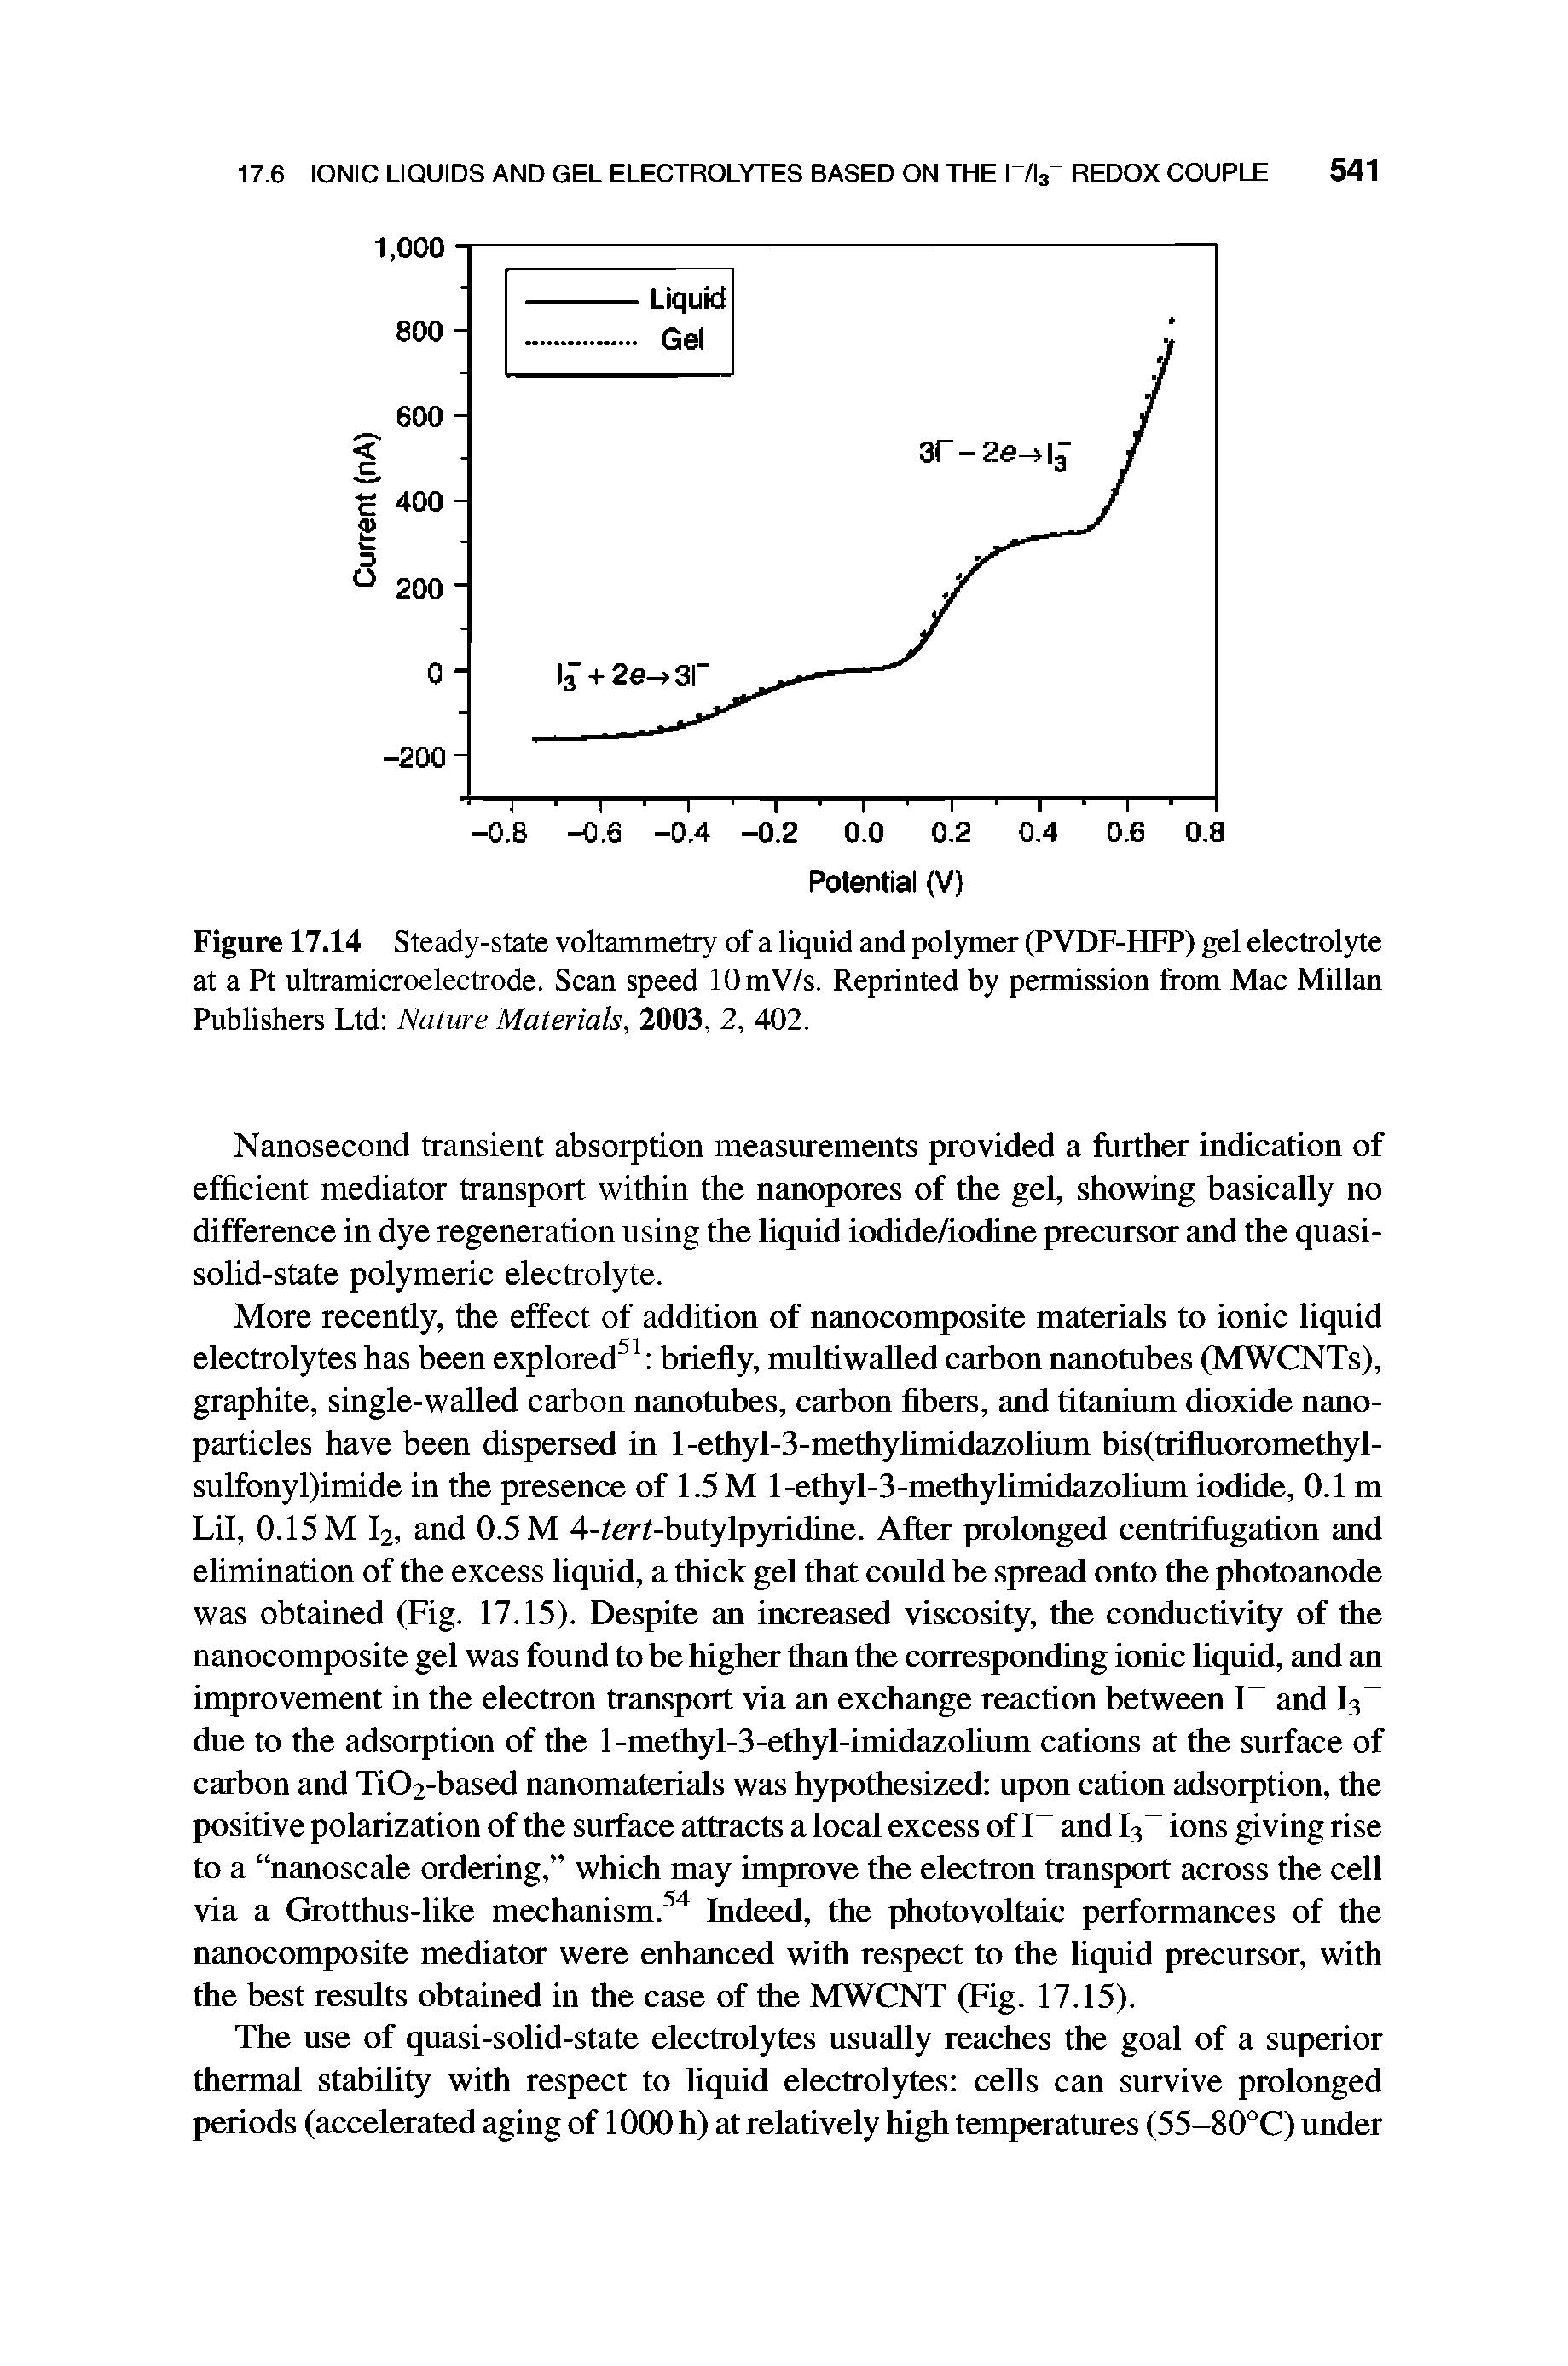 Figure 17.14 Steady-state voltammetry of a liquid and polymer (PVDF-HFP) gel electrolyte at a Pt ultramicroelectrode. Scan speed lOmV/s. Reprinted by permission from Mac Millan Publishers Ltd Nature Materials, 2003, 2, 402.